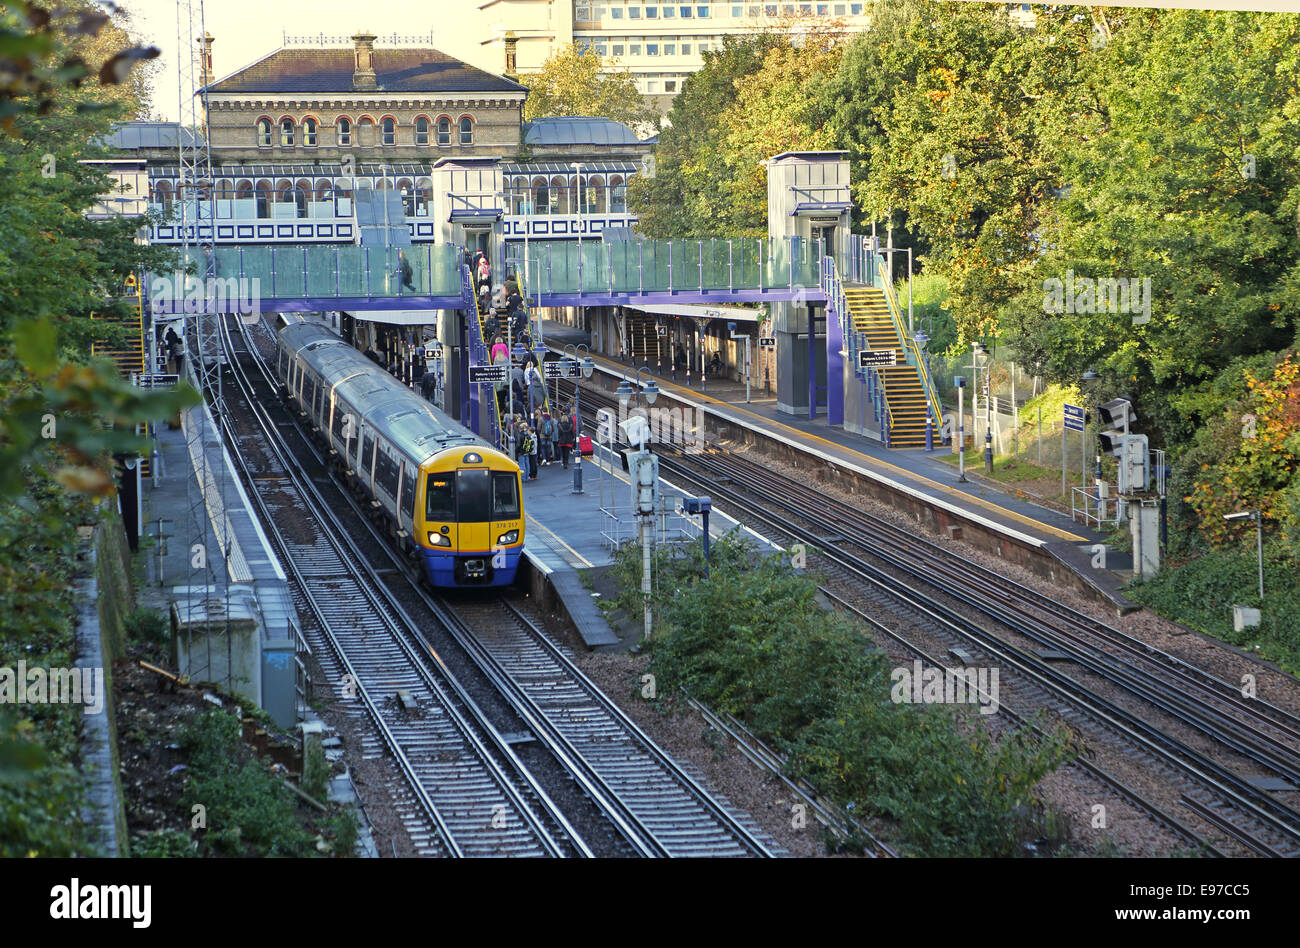 Denmark Hill railway station in south east London. An Overground train waits at the platform. Shows new lifts and footbridge. Stock Photo